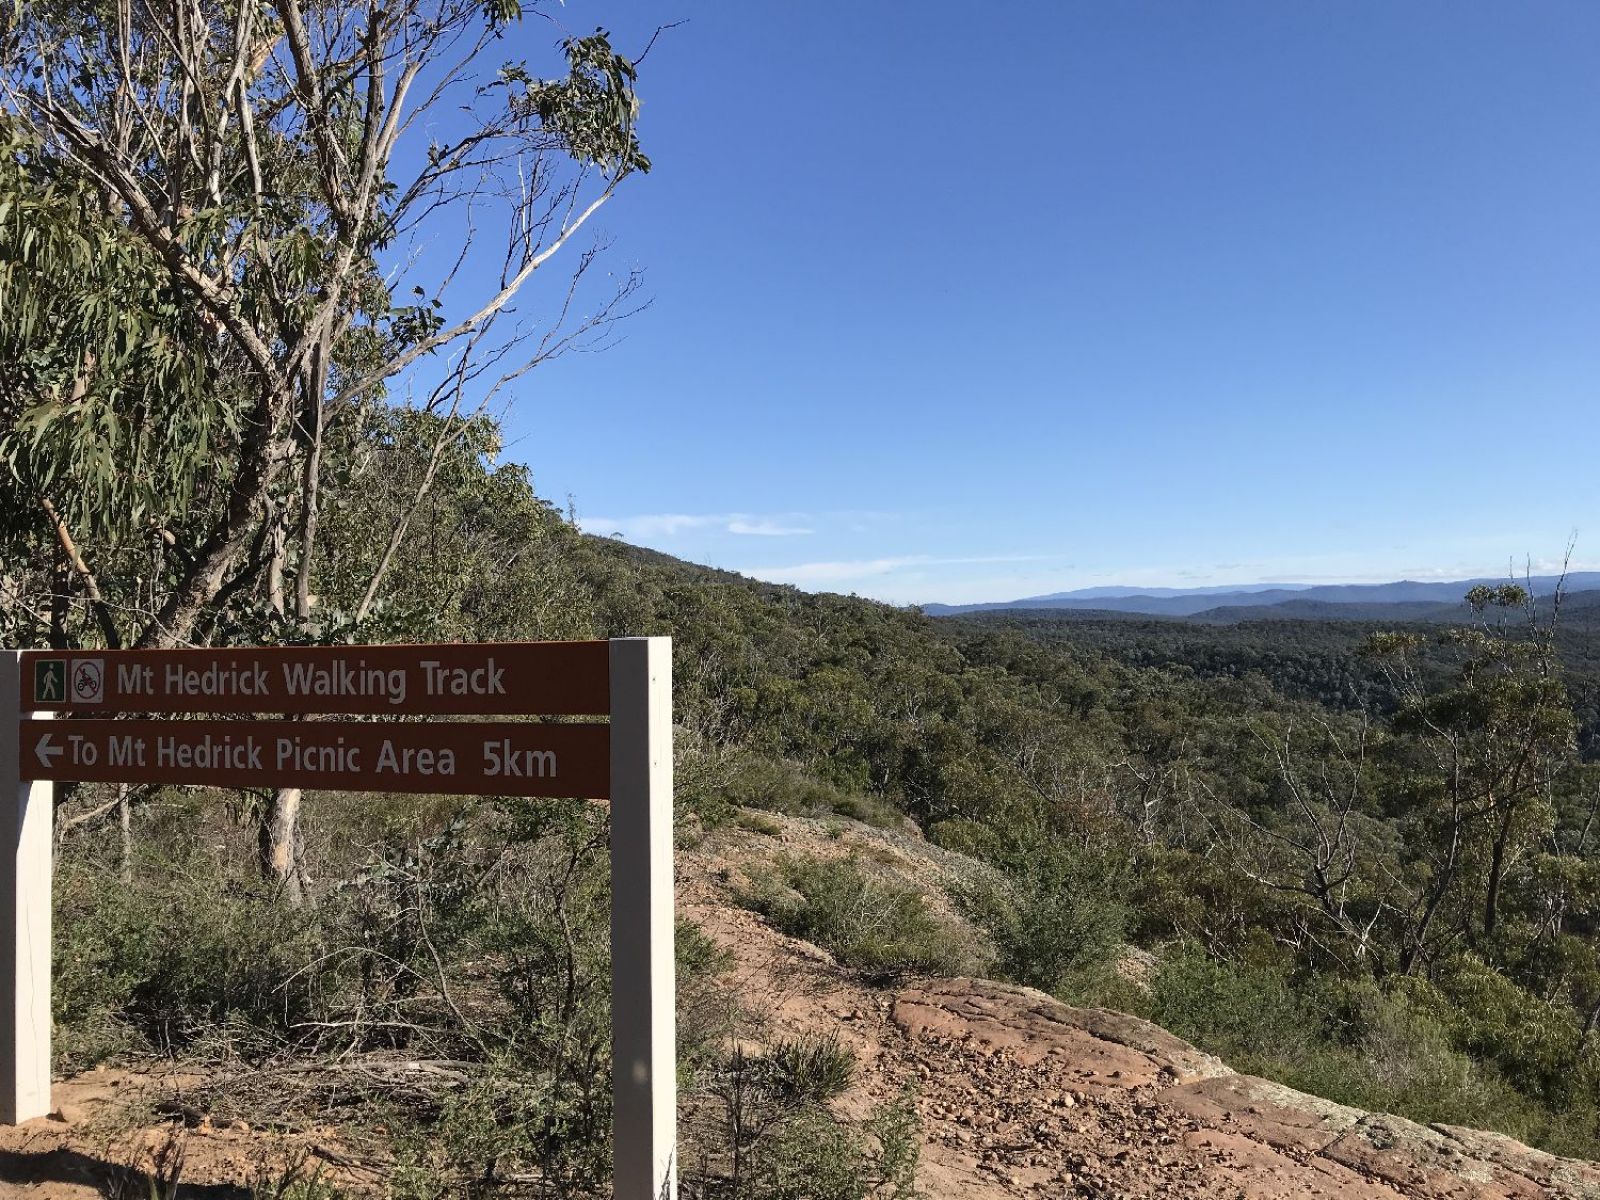 Walking track sign showing the picnic area is 5km away, with a lookout in the background